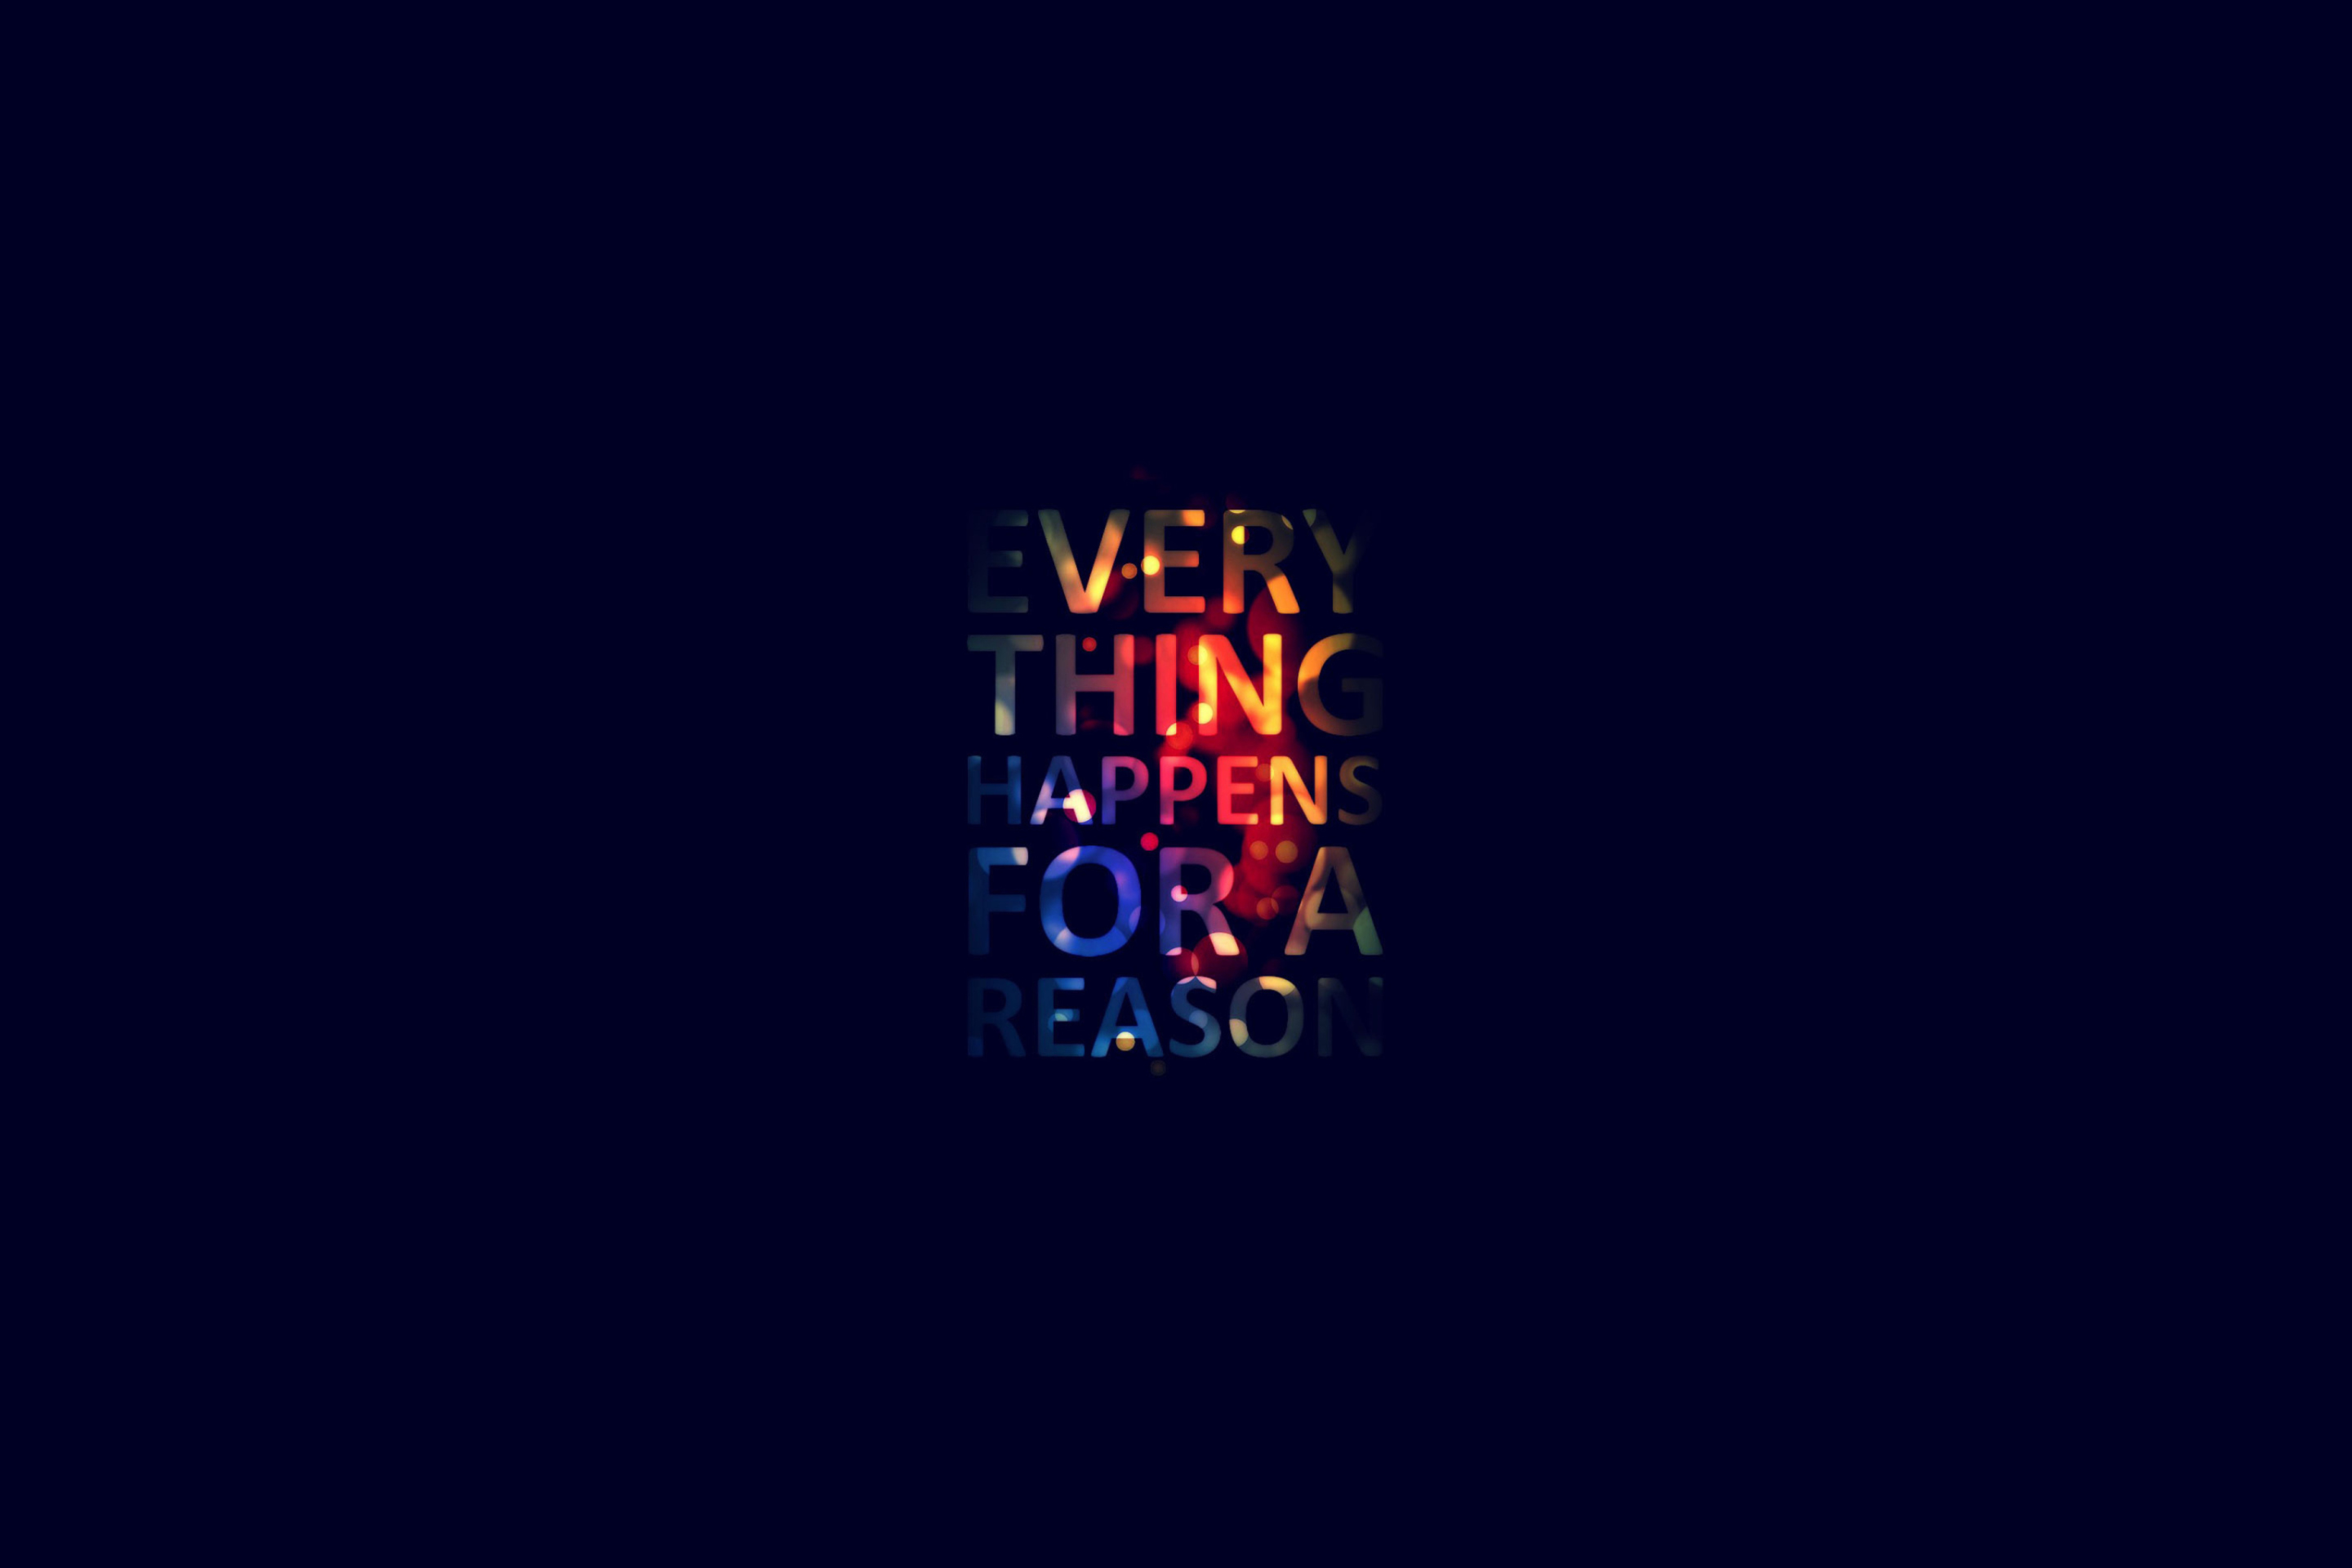 Das Everything Happens For Reason Wallpaper 2880x1920